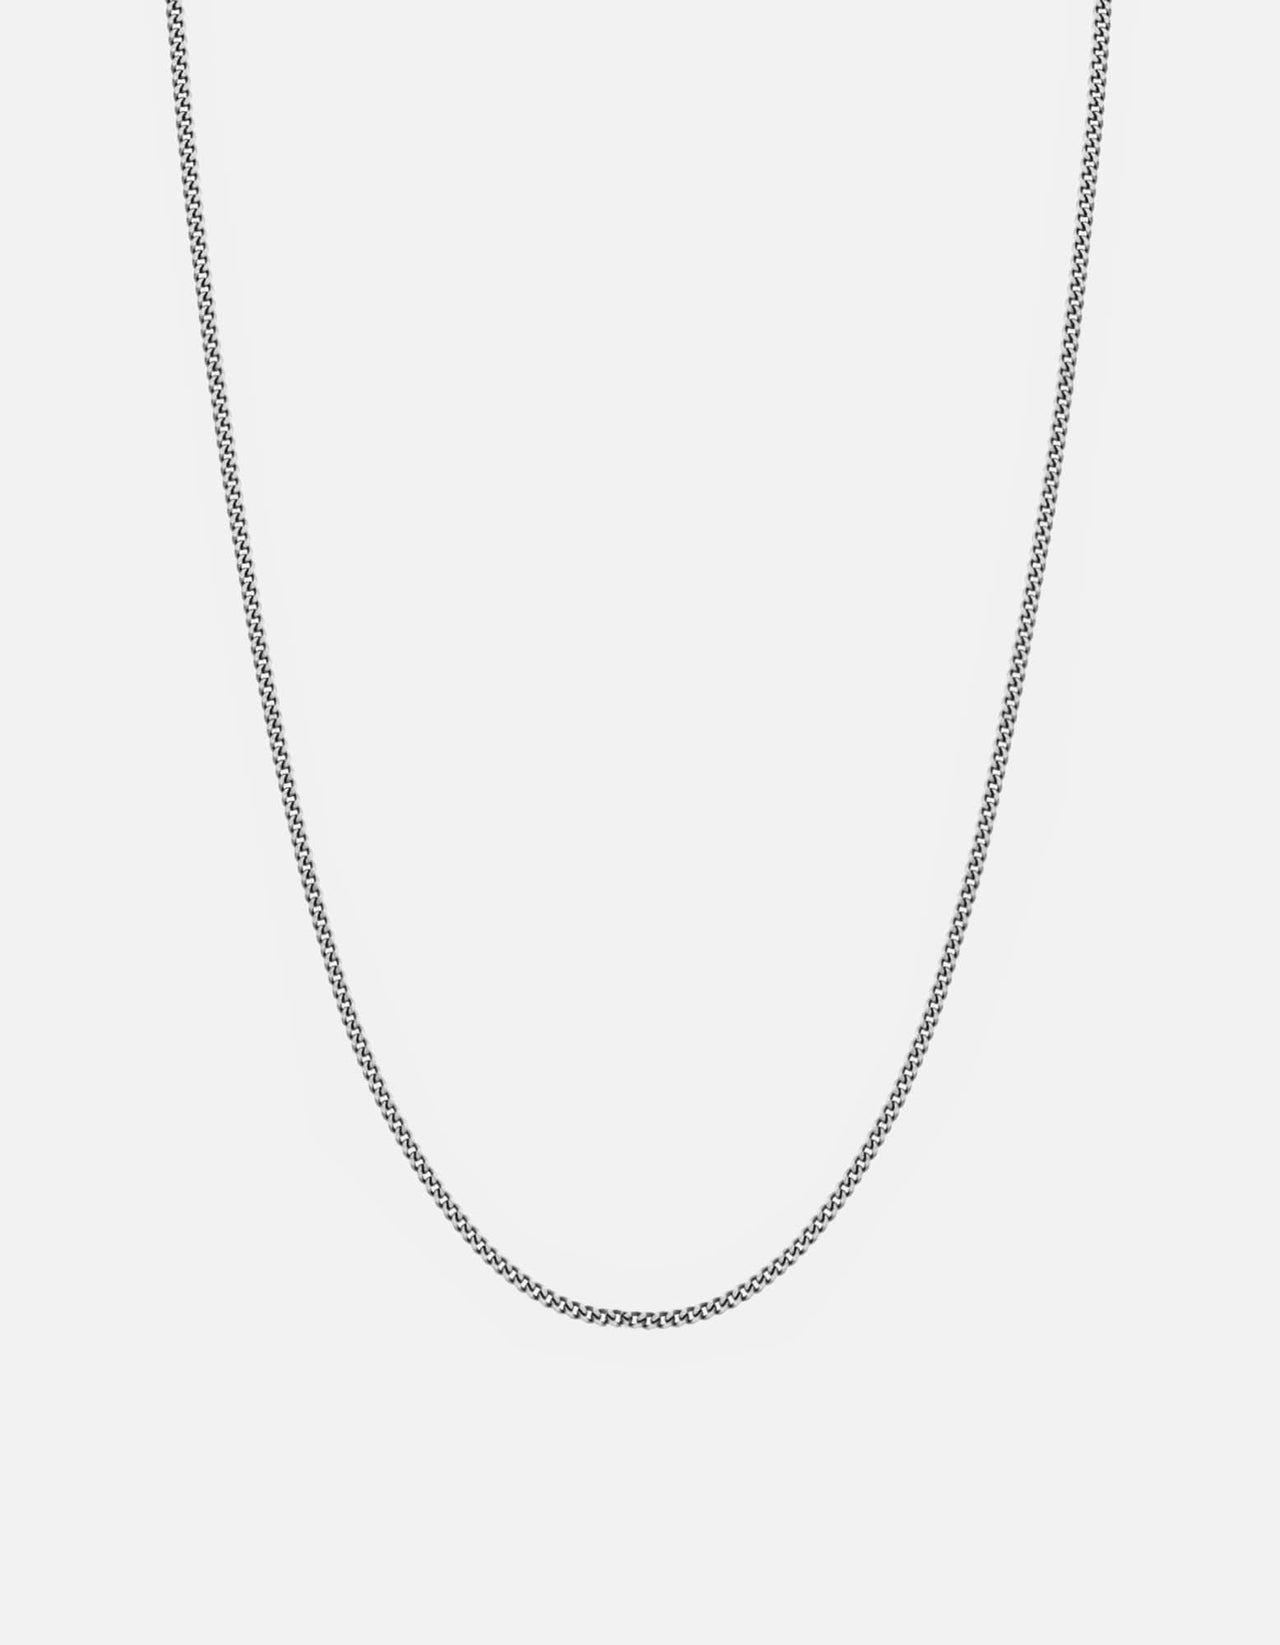 Oxidized Sterling Silver Chain Necklace 18